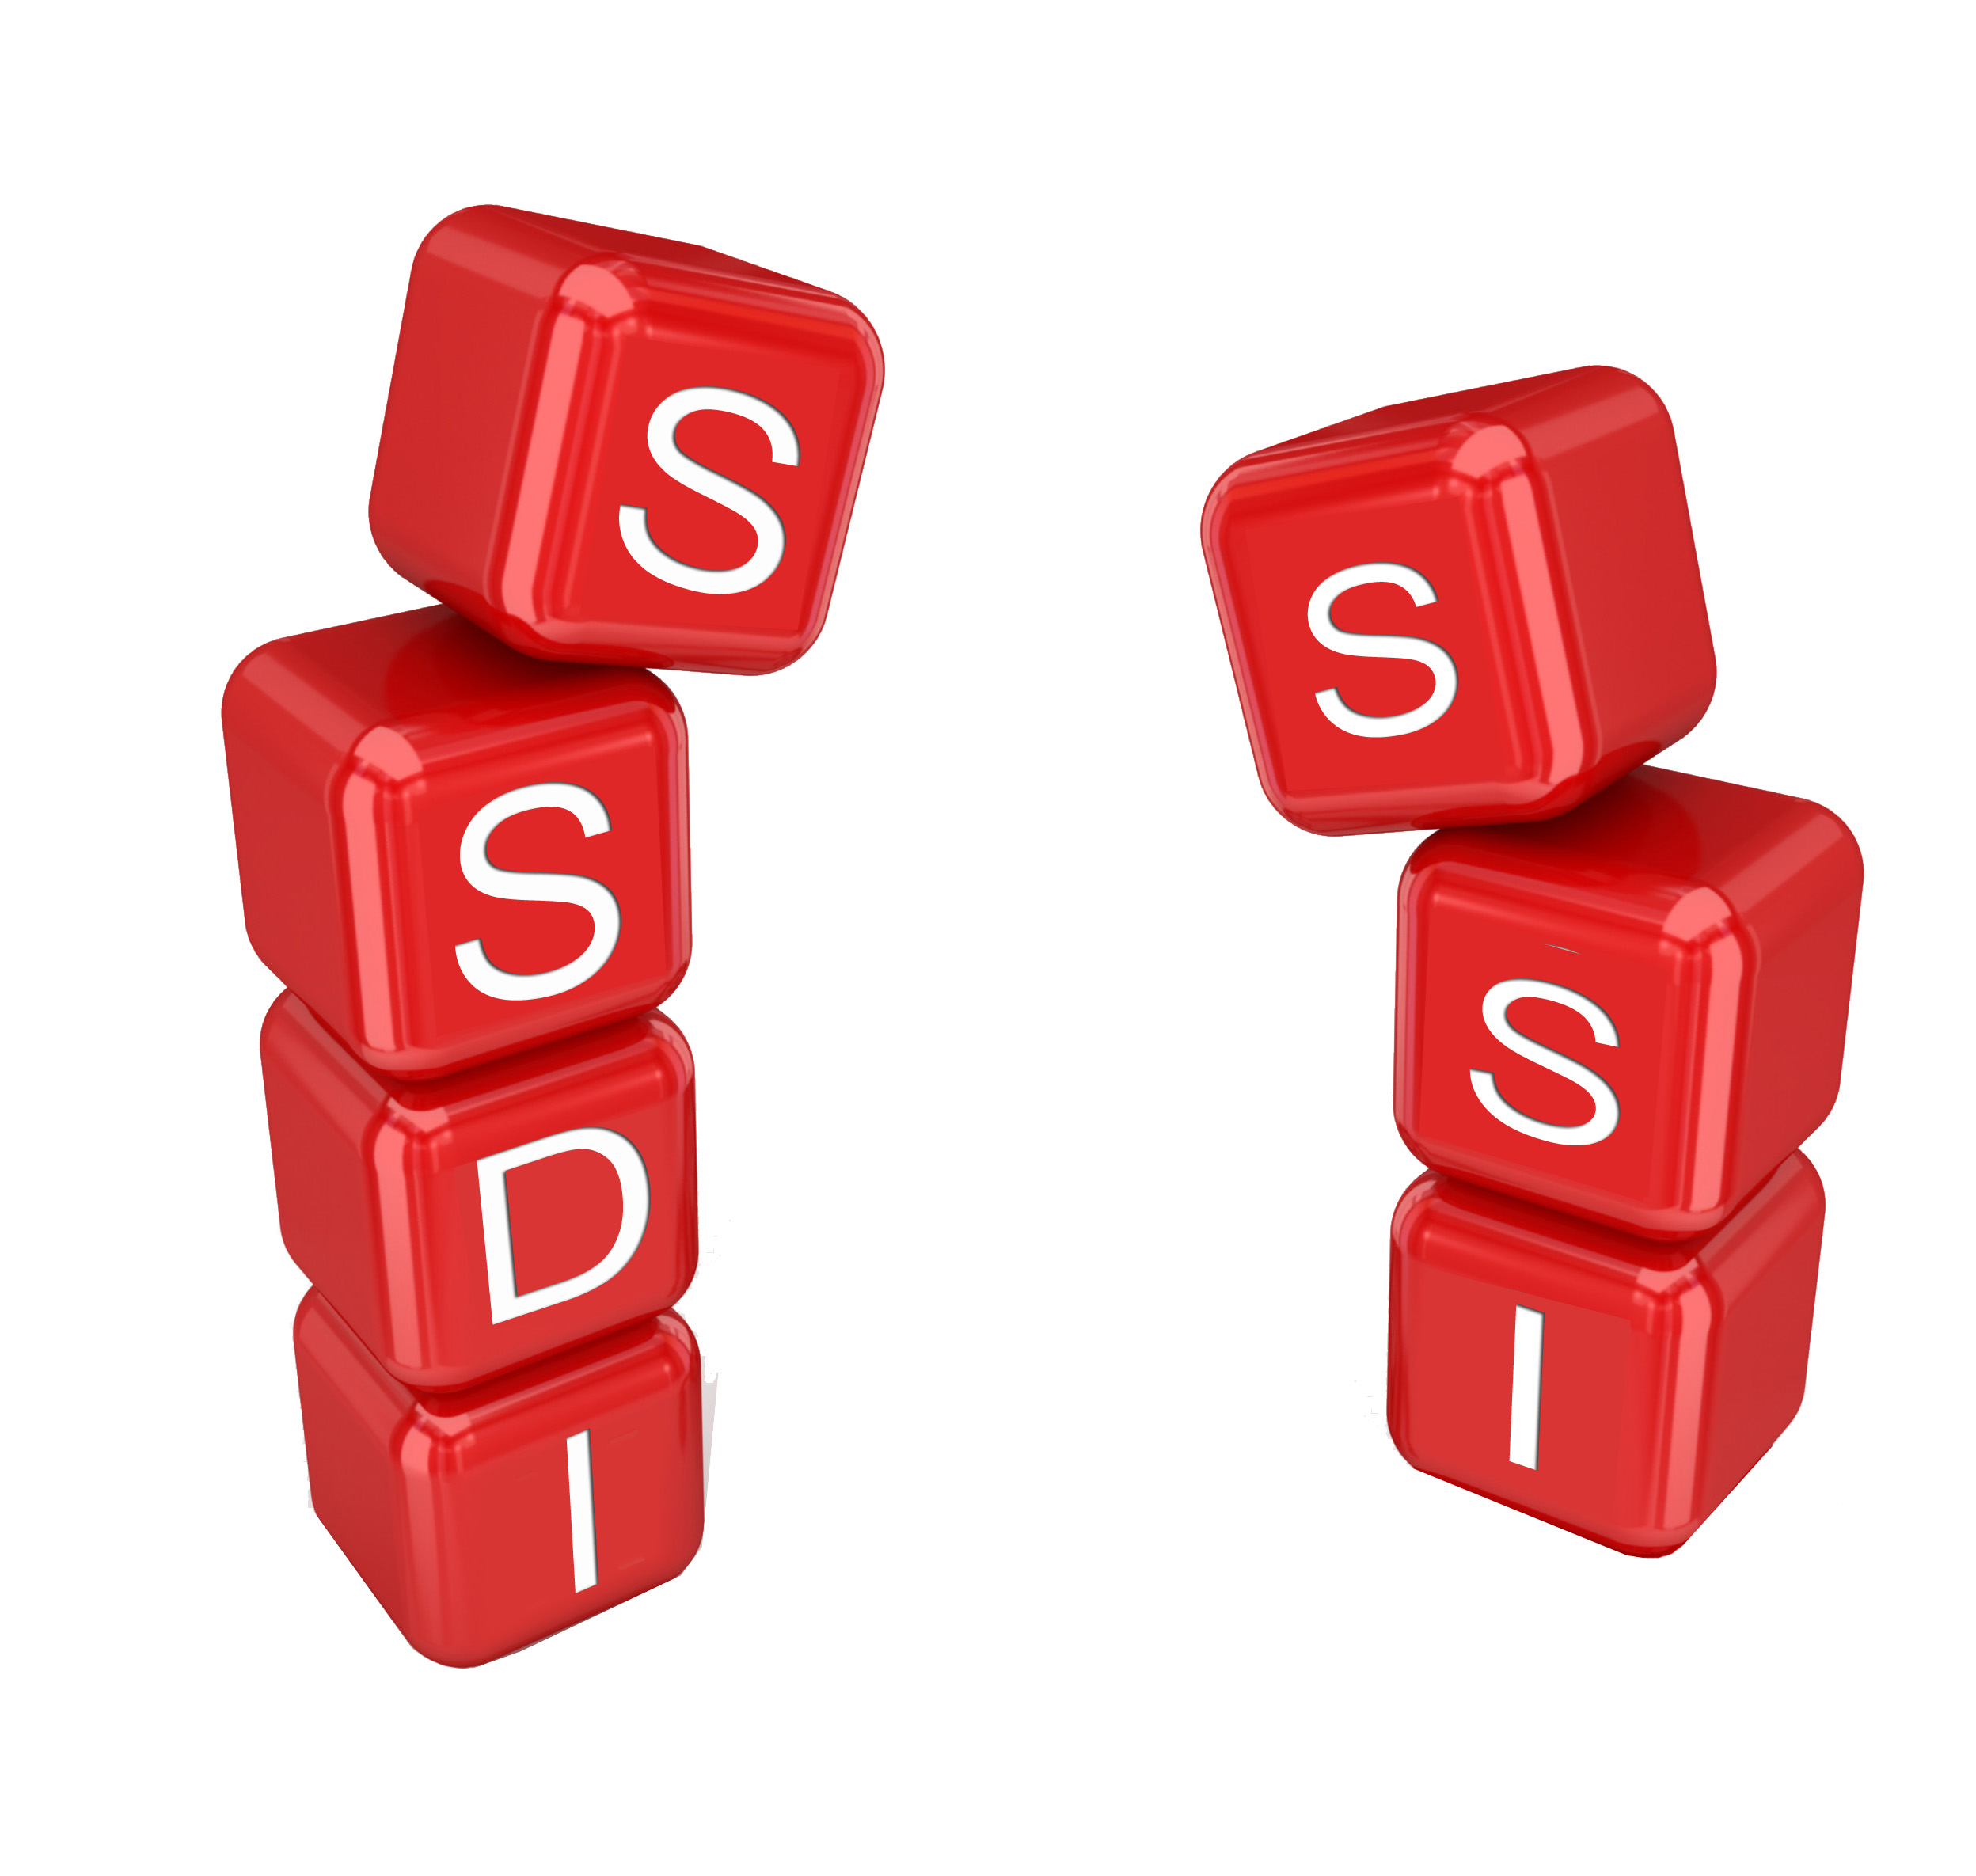 Why Do I Qualify for SSI, but not for SSDI? Insight from Tom Nash